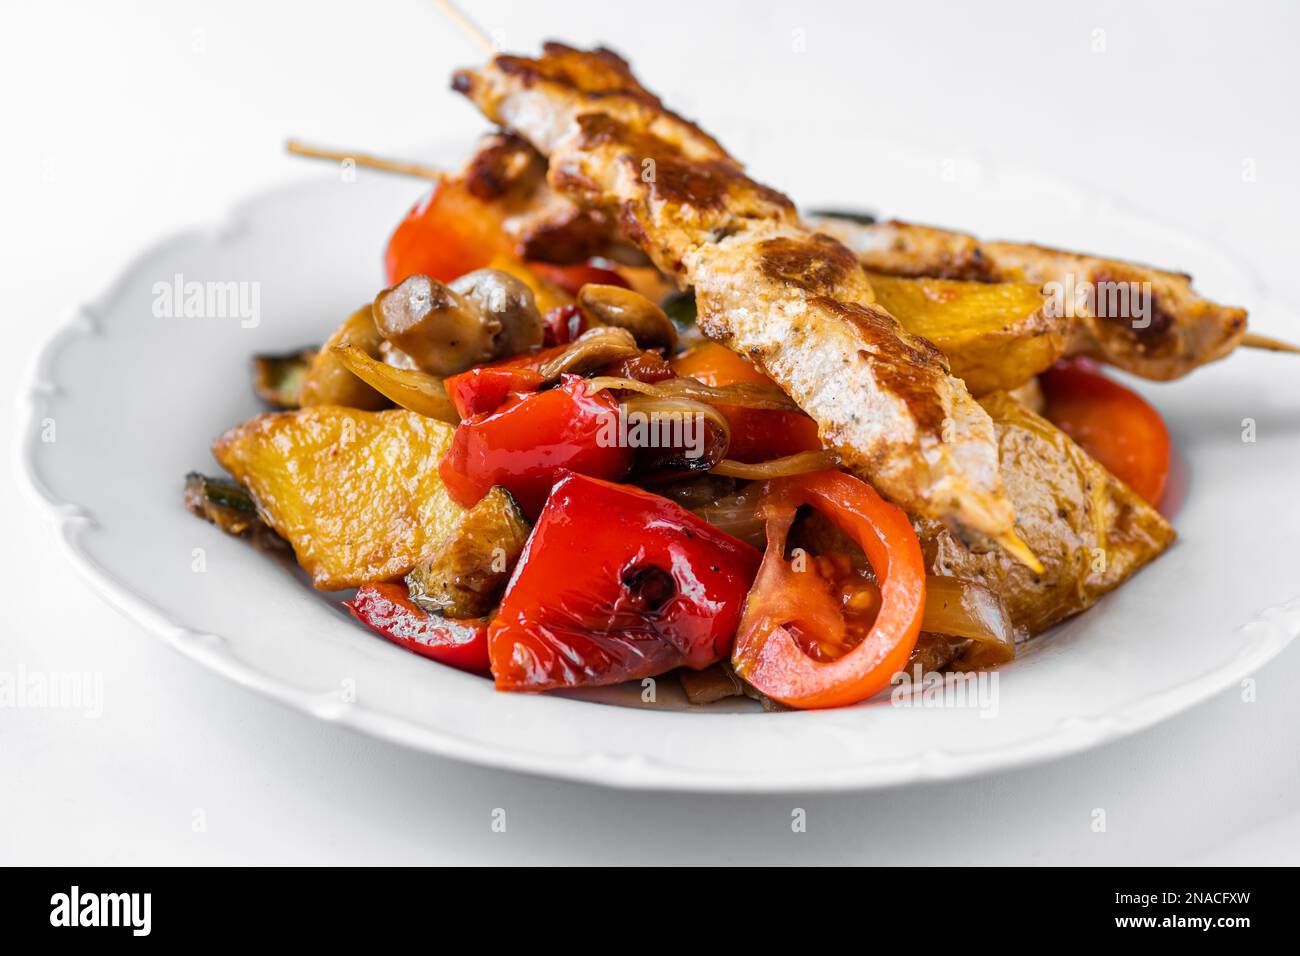 Souvlaki, pork meat on skewer on grilled juicy vegetable on white plate on white background, closeup. Stock Photo